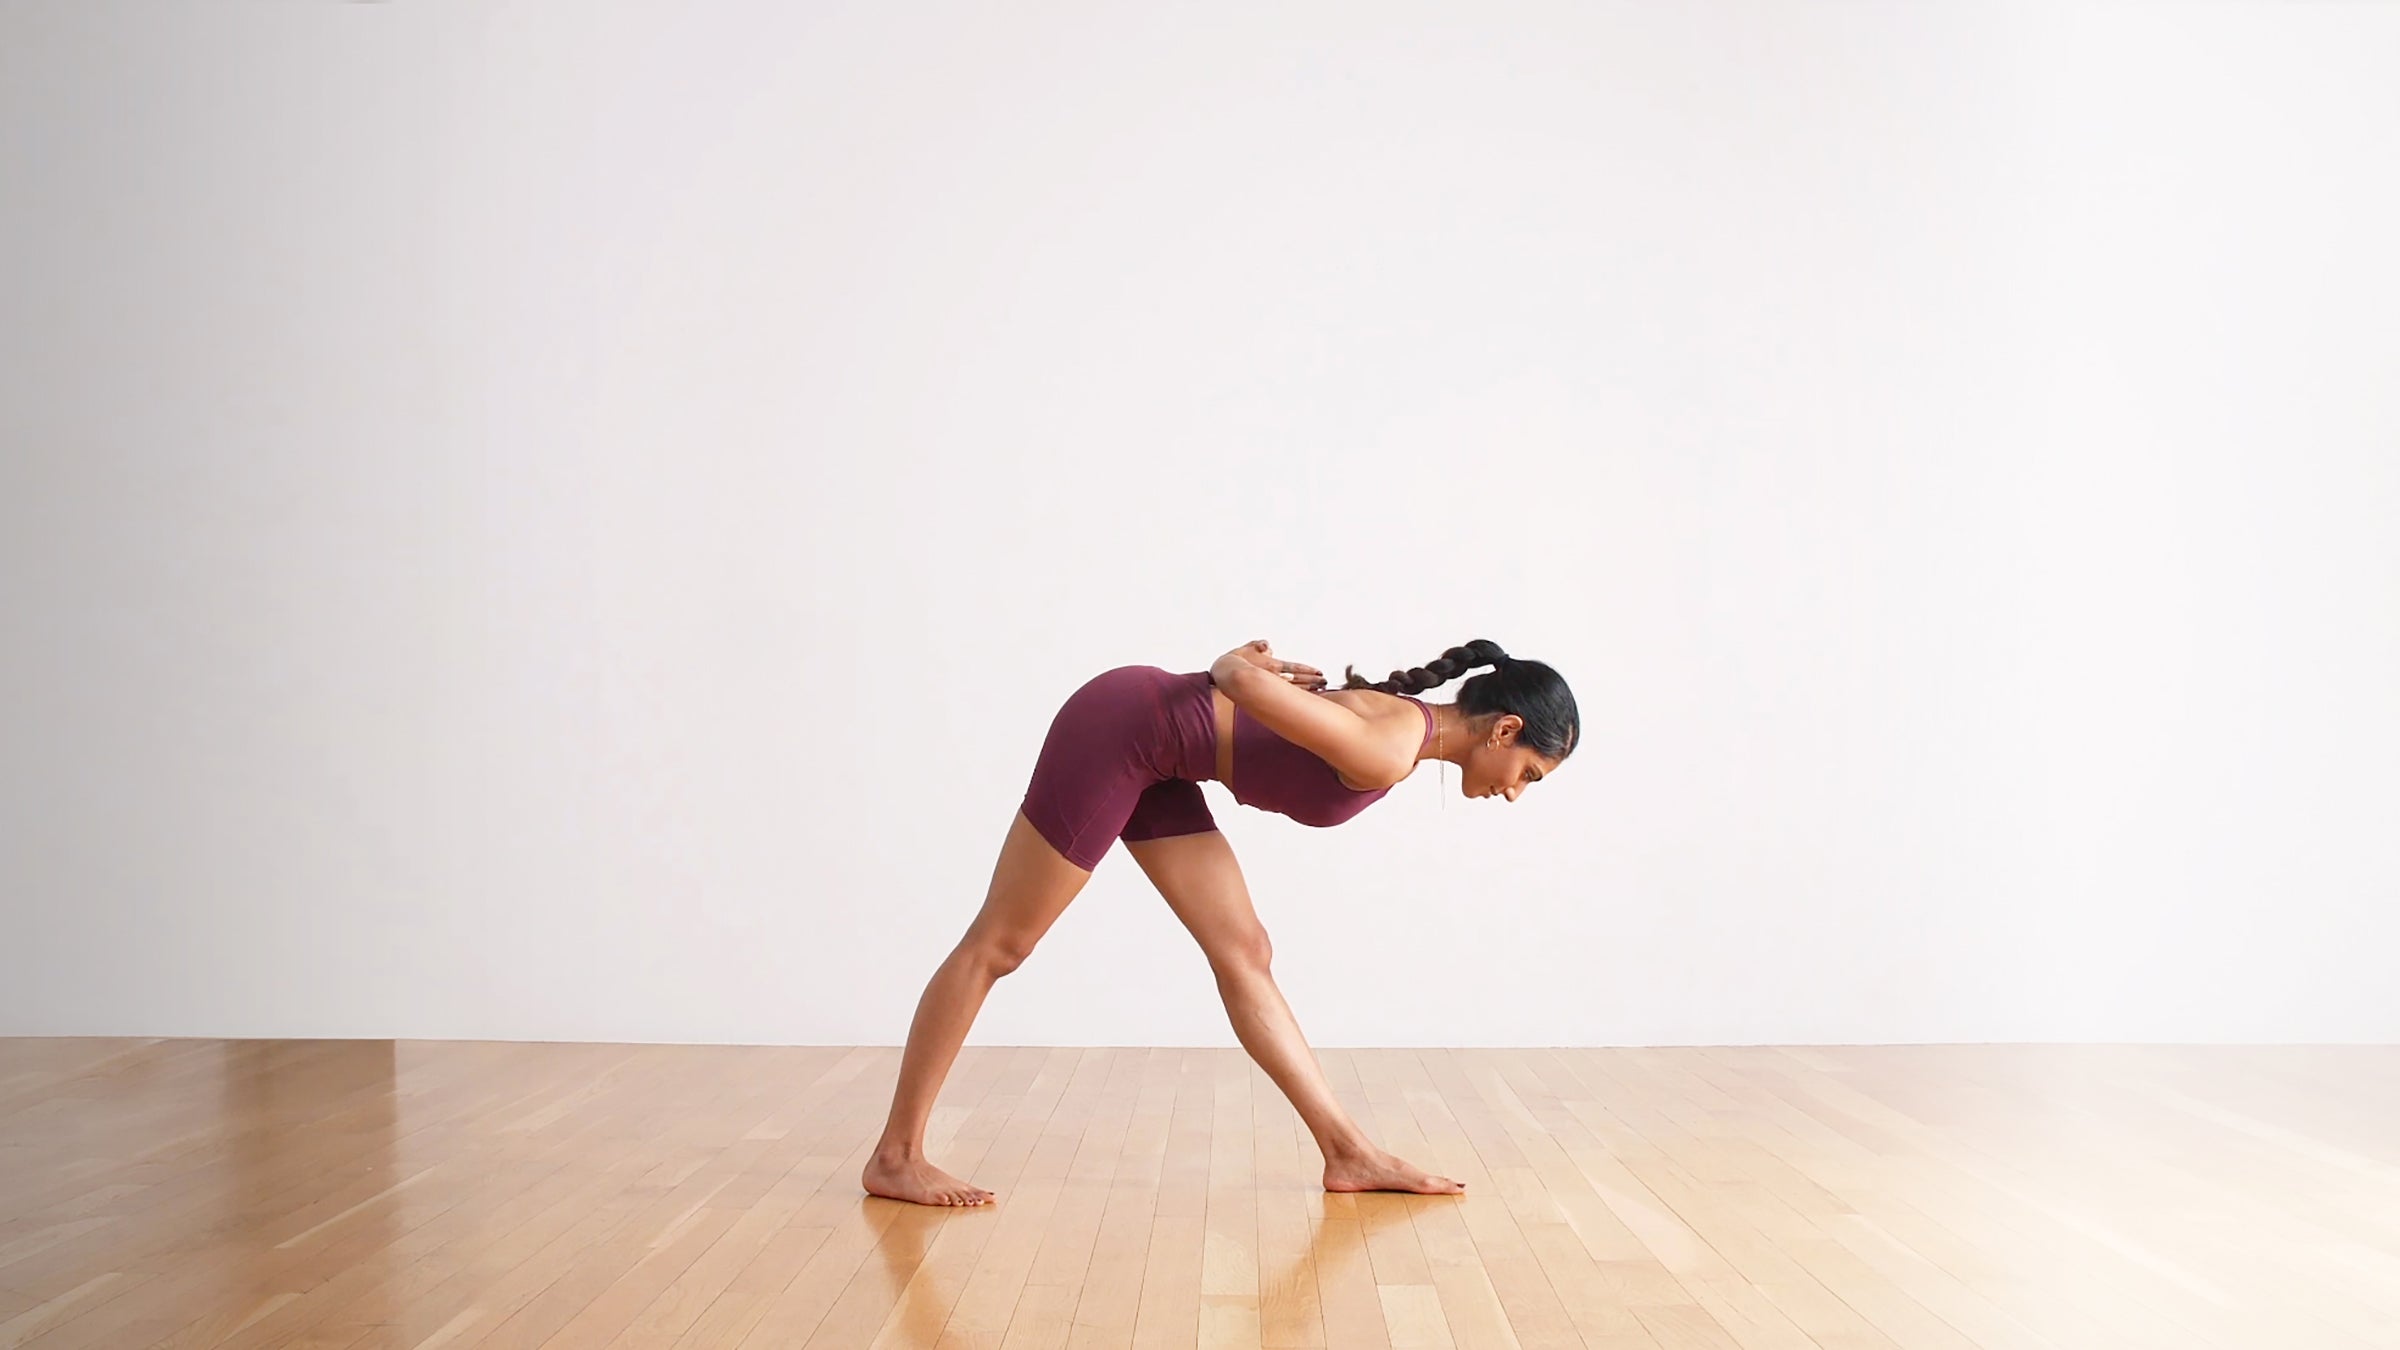 Yoga Poses For Spine Alignment